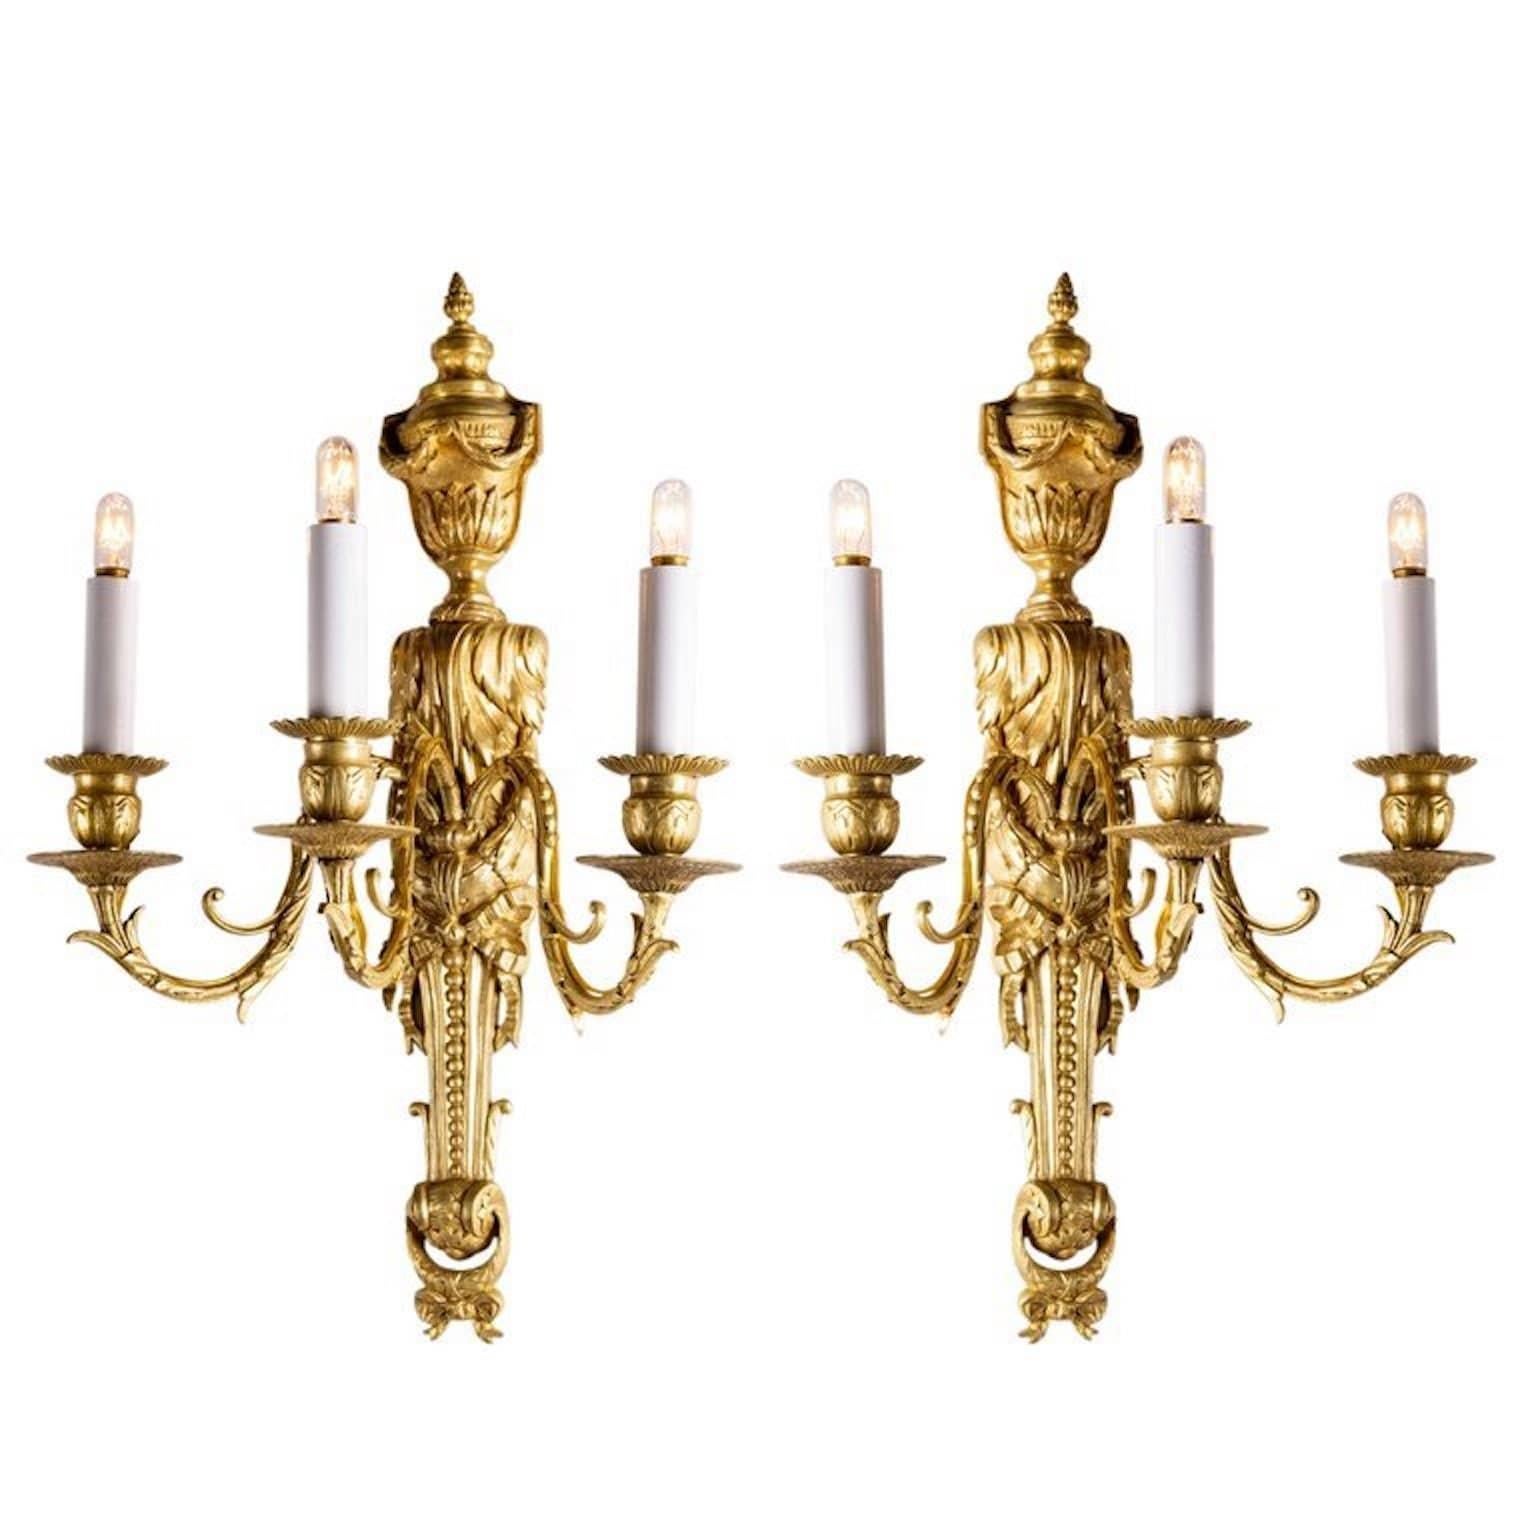 A pair of Louis XVI style, chiseled and gilt bronze three-armed antique wall sconces, of Italian origin, dating back to the late 19th century.
Original and beautiful bronze casting and superb quality fire brilliant gilding. Topped by an urn shaped